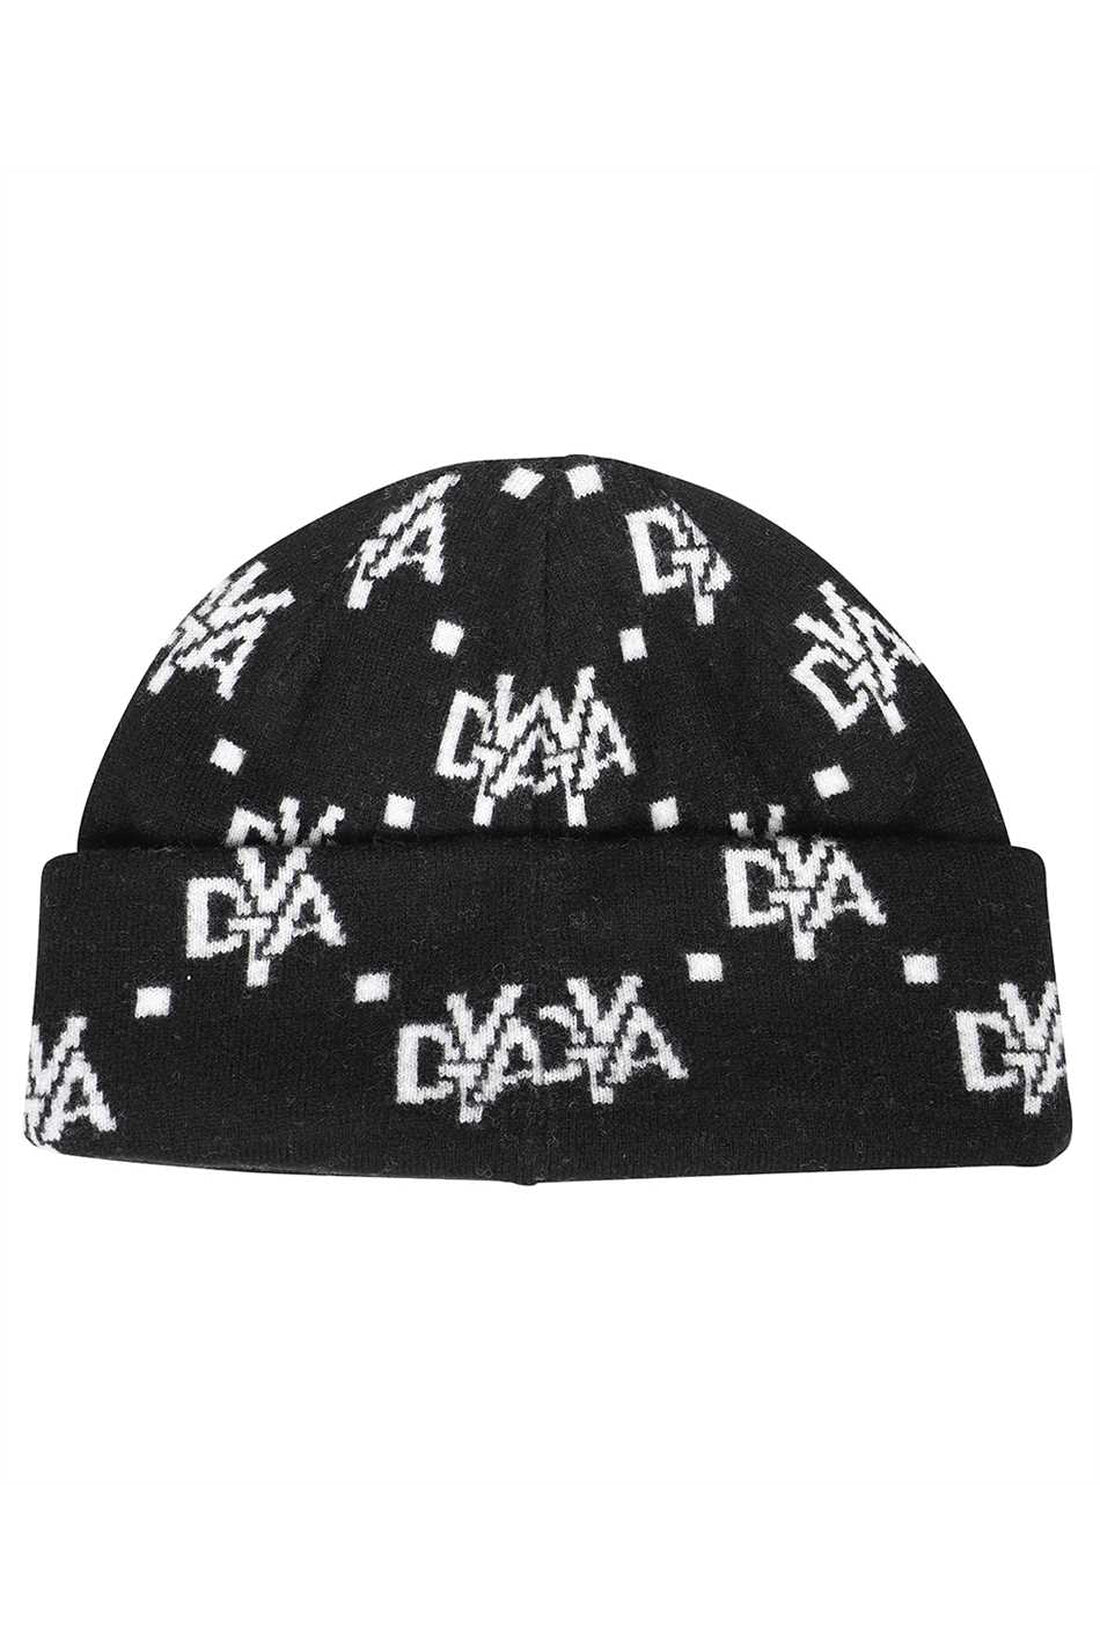 Duvetica-OUTLET-SALE-Saladino knitted beanie-ARCHIVIST